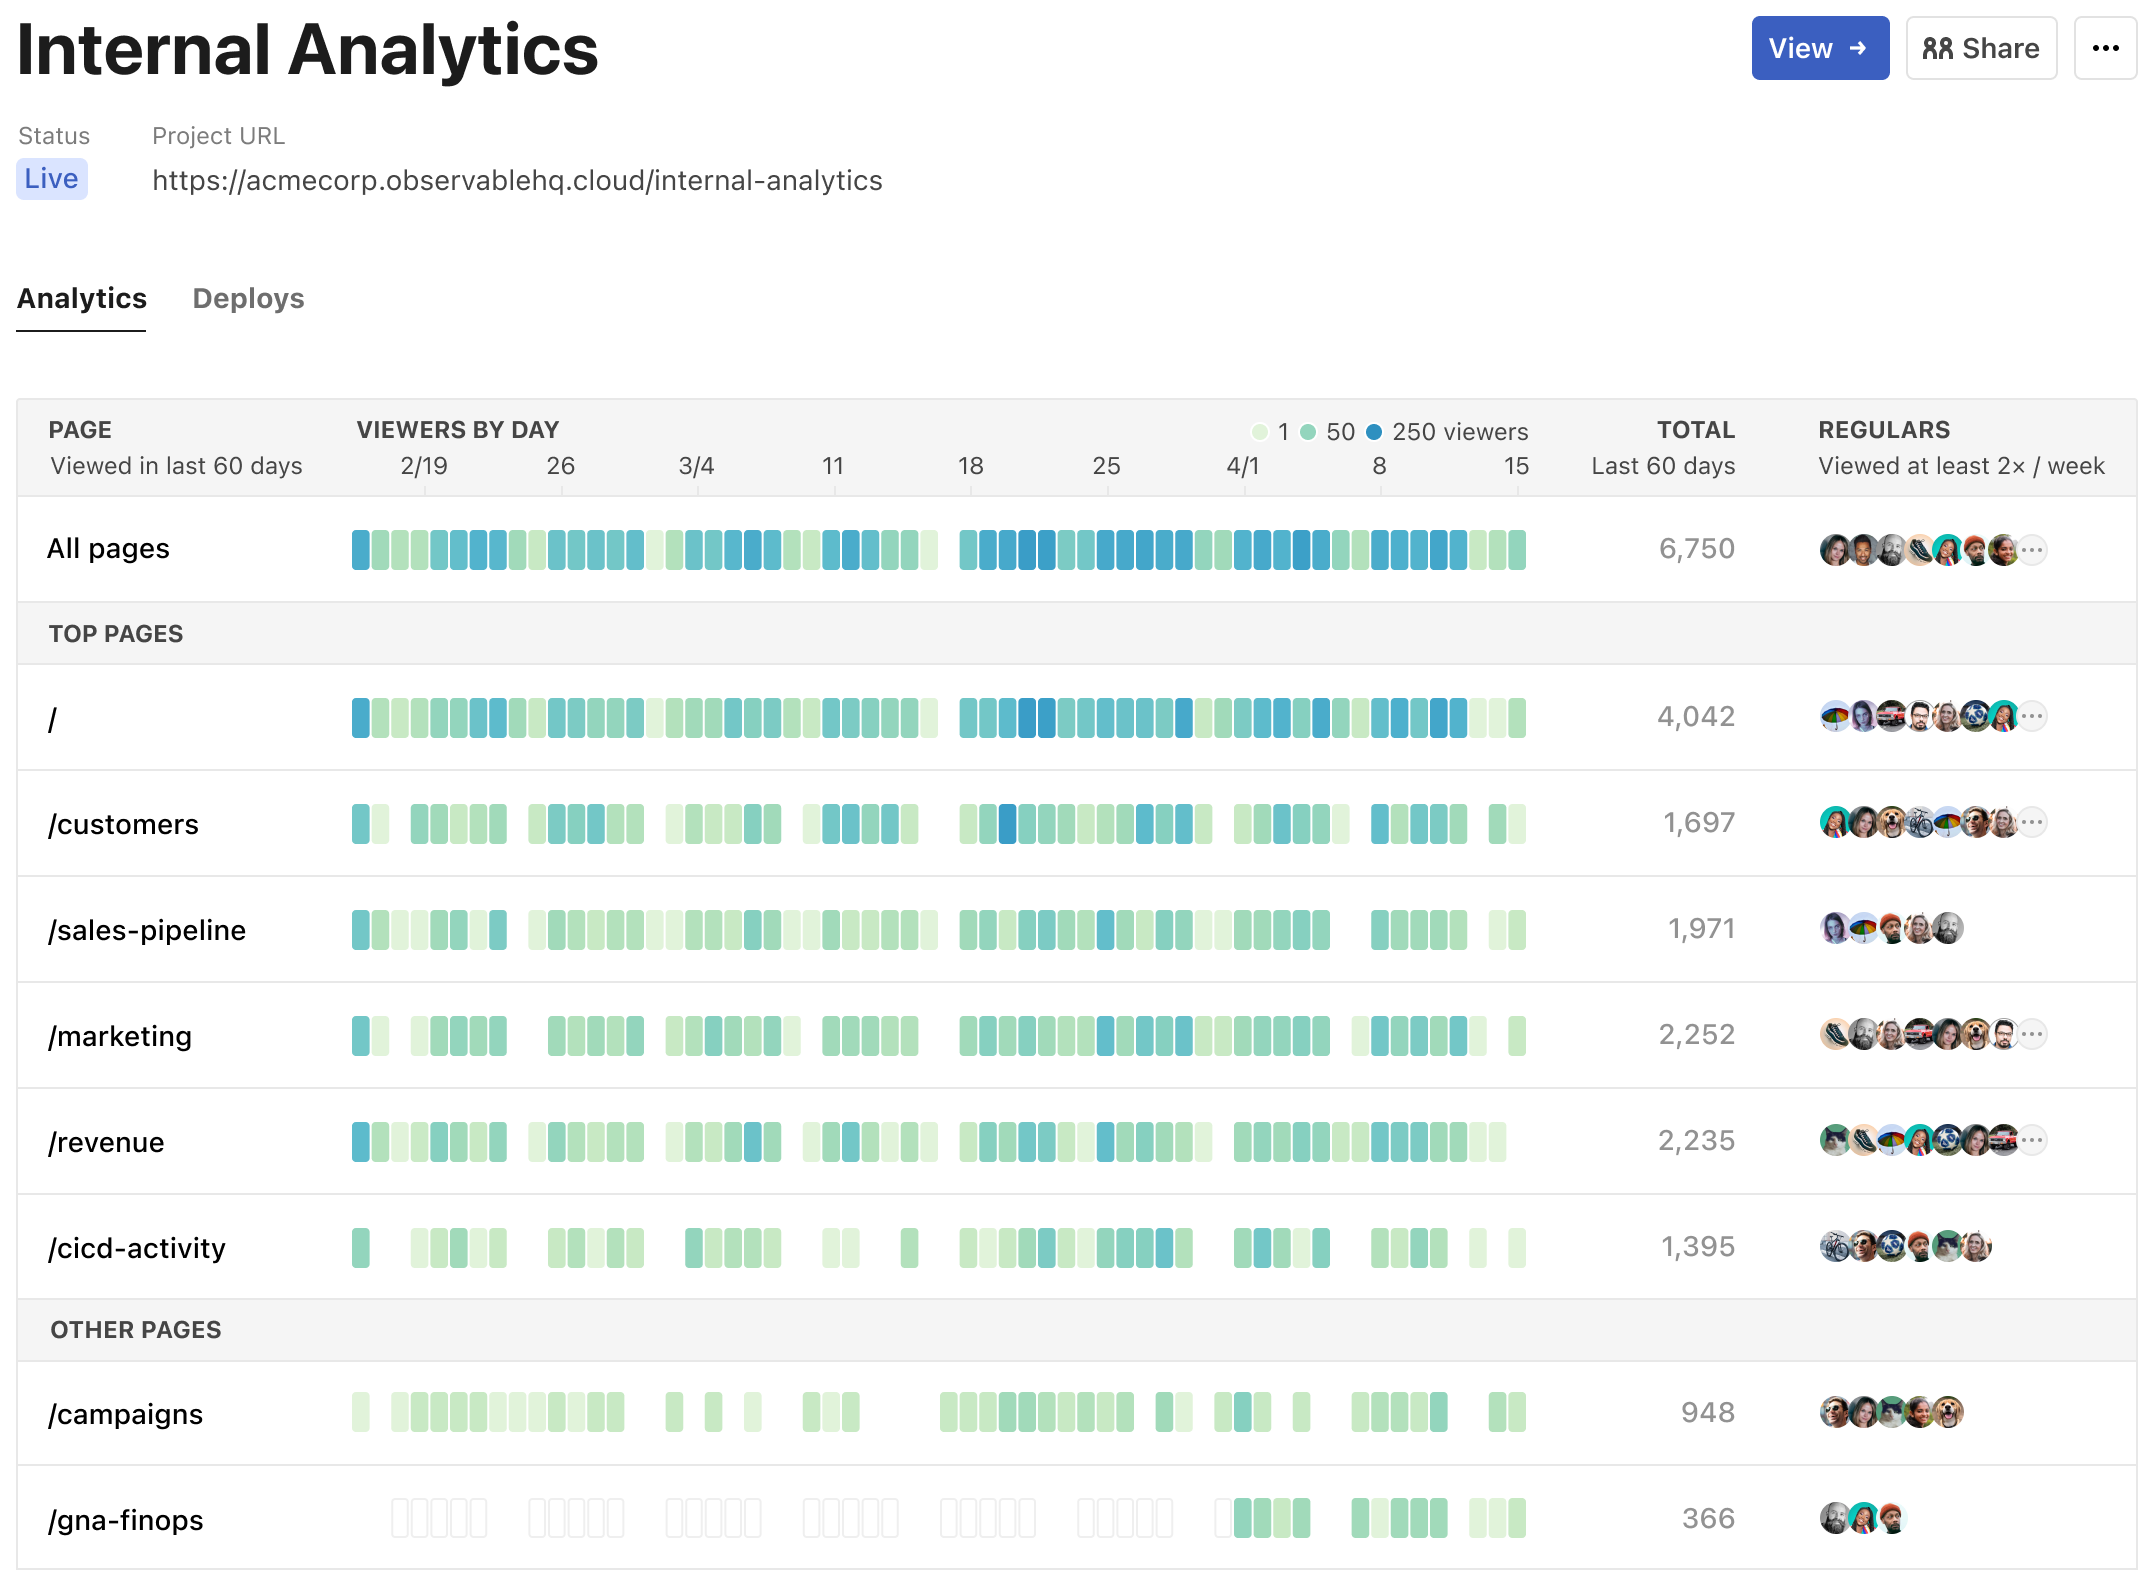 Screenshot of the analytics page for a single project. It shows the title, Observable BI, at the top, and a row of colored boxes for each page to show activity, an average number of views, and a row of avatar images for regular viewers of each page.